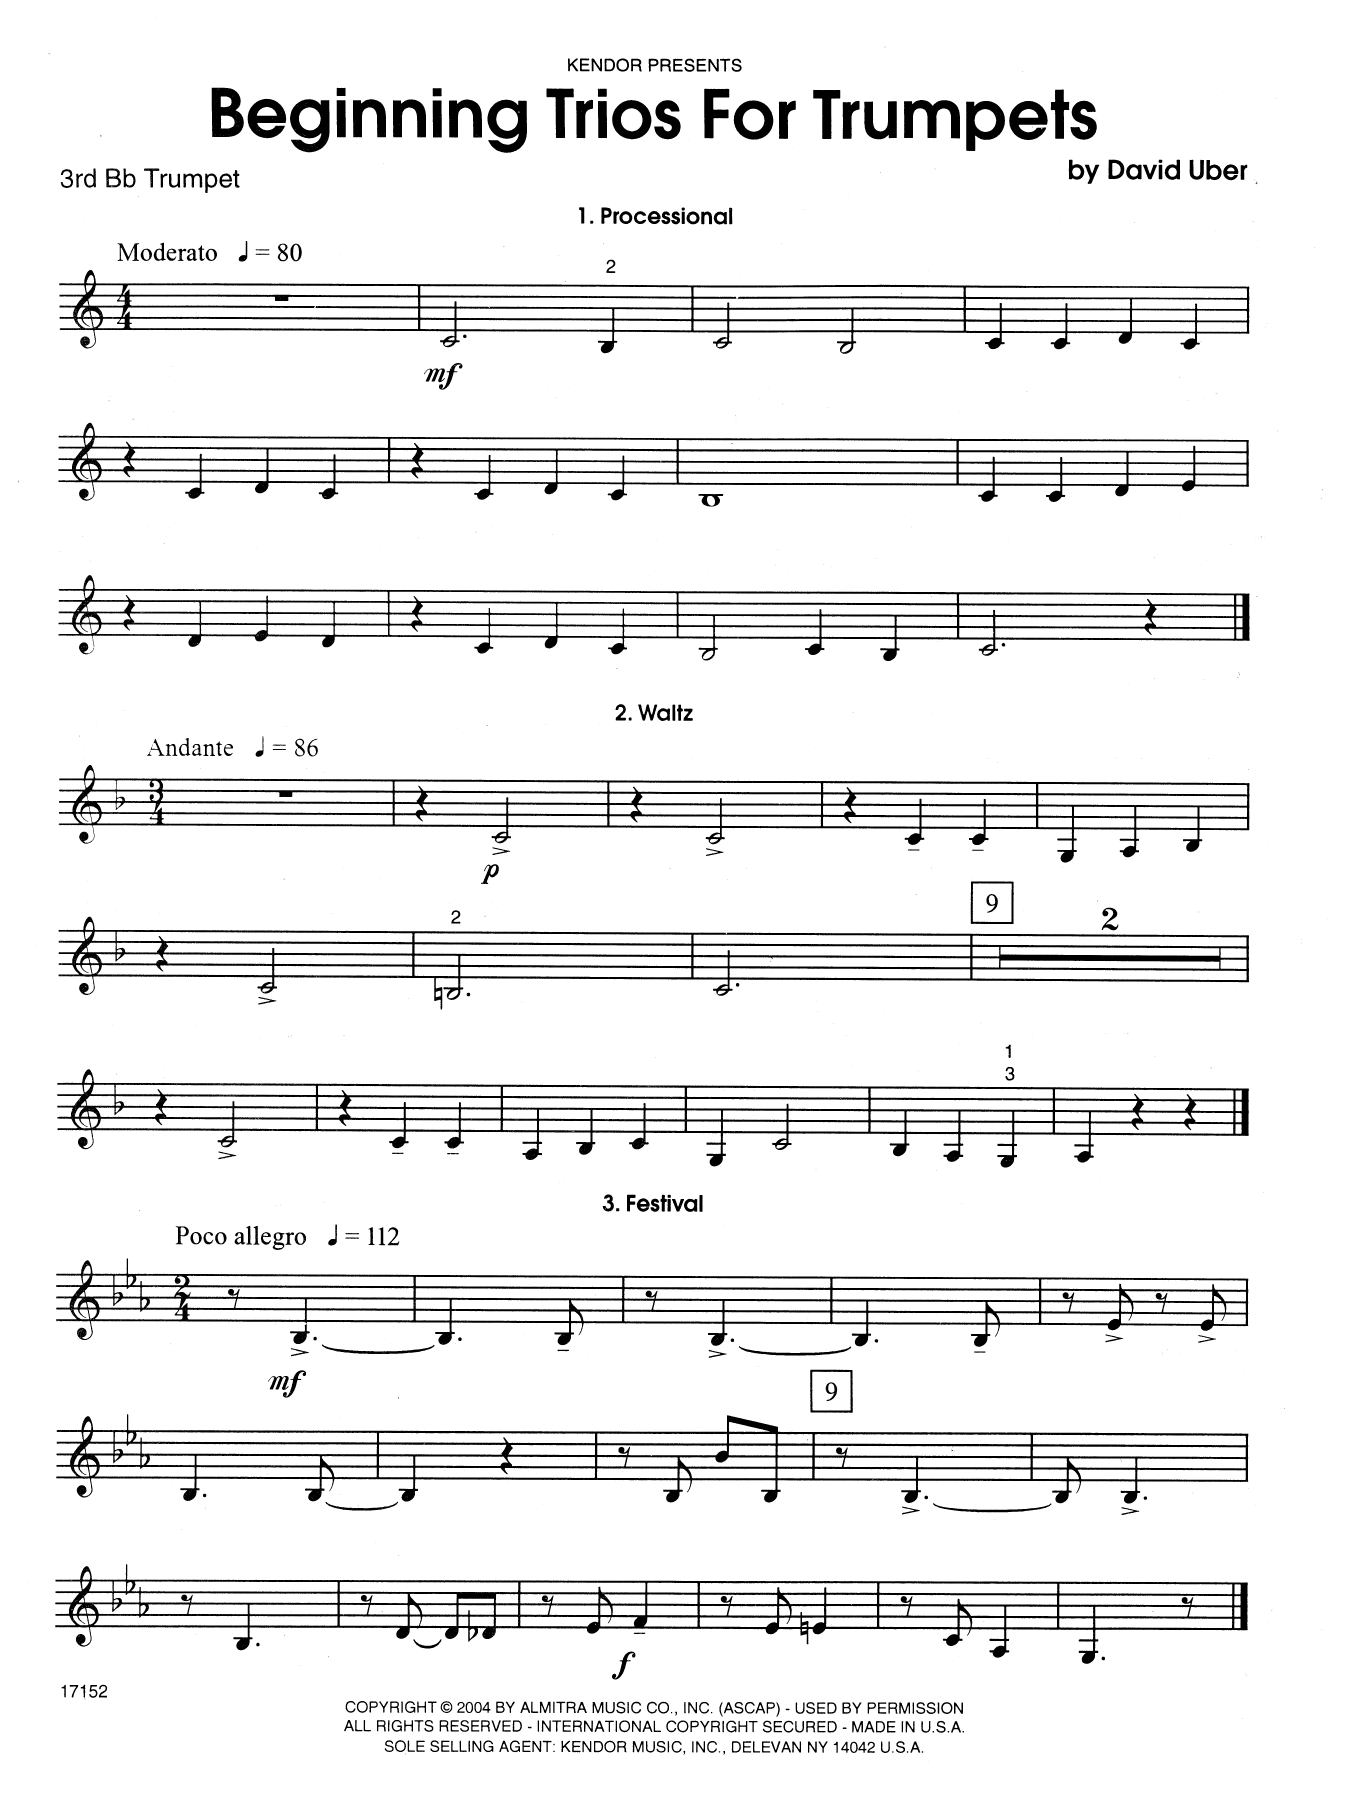 David Uber Beginning Trios For Trumpets - 3rd Bb Trumpet sheet music notes and chords. Download Printable PDF.